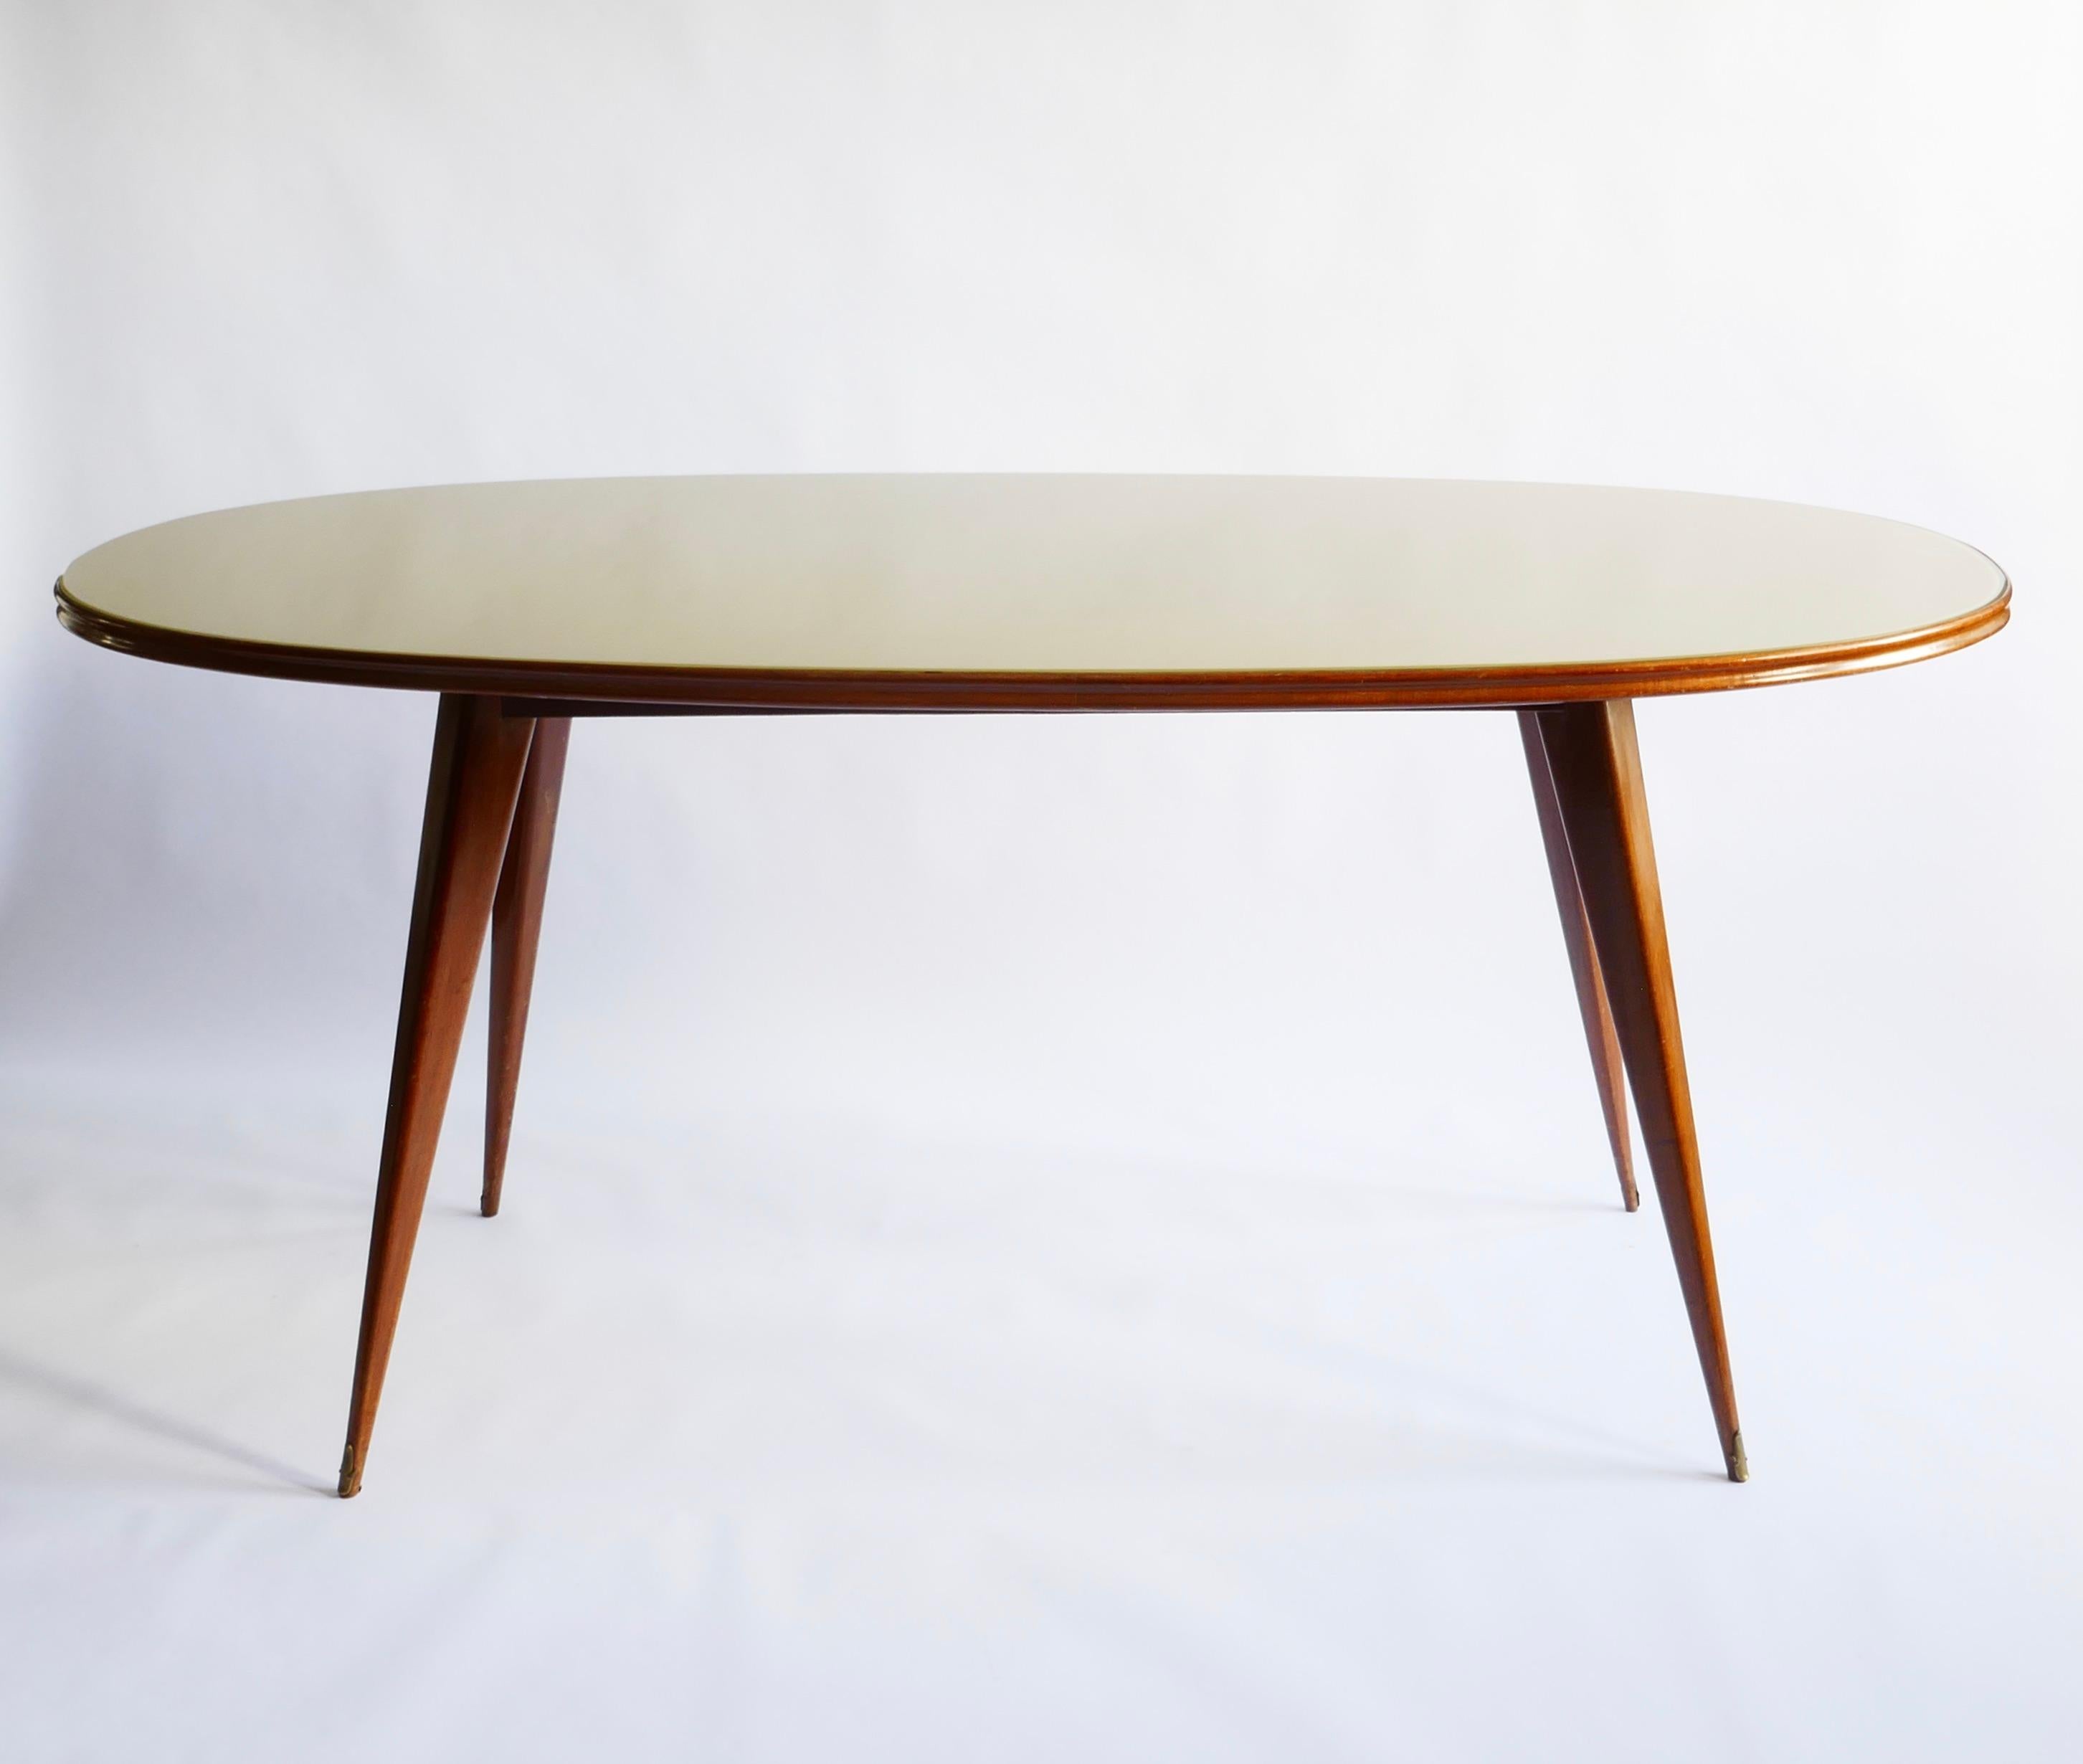 Minimalist beautiful Italian design for this oval shaped dining table with a mahogany structure and a pale green glass top.
Sits 6 comfortably. Its linear shape and size can see it transform into a console 
Measures: L189.5 x W 89.5 x H80cm.
 